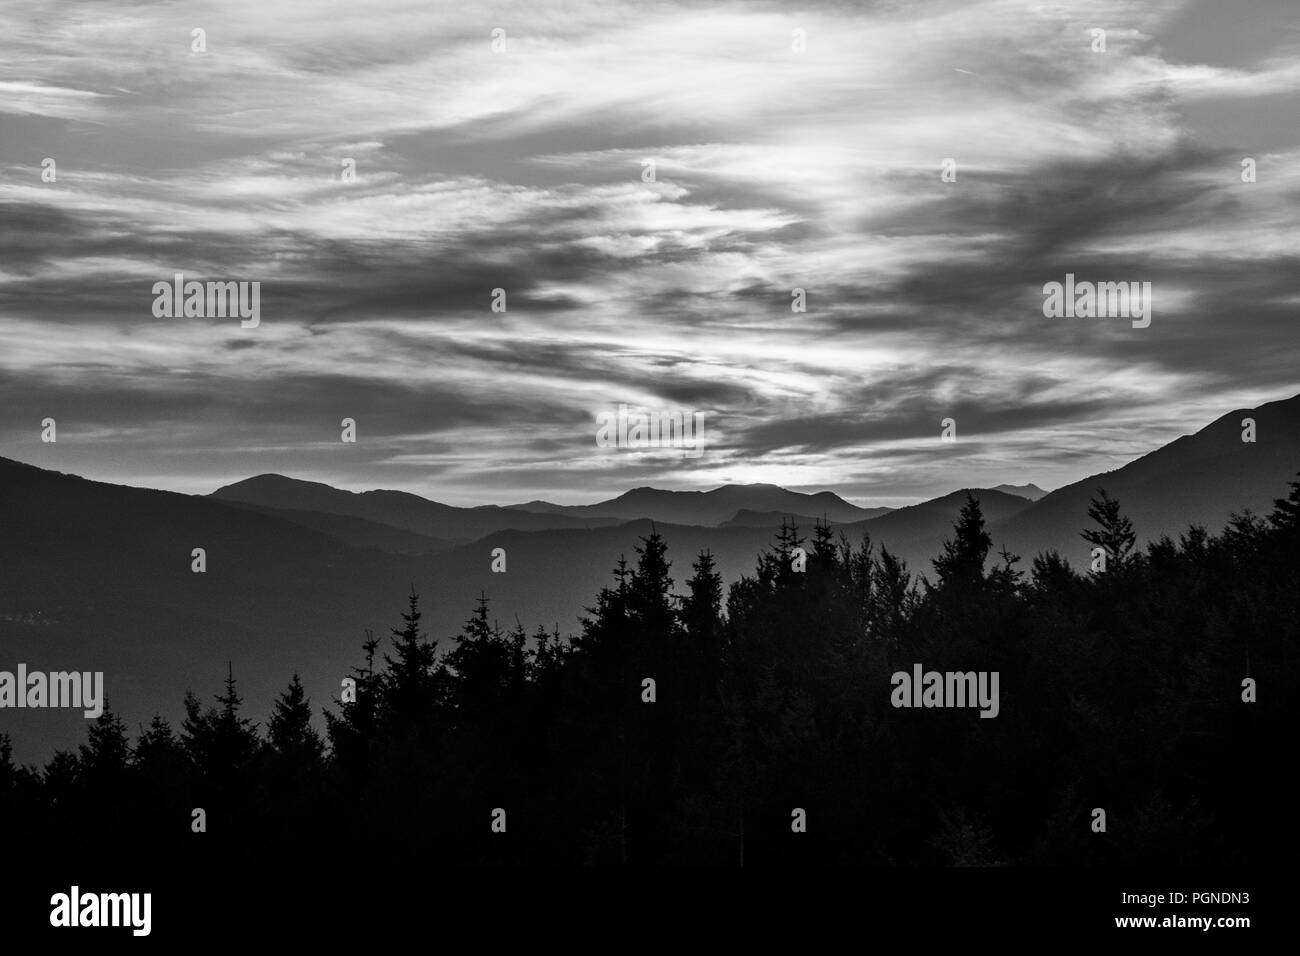 Profile of mountain and forest with cloudy sky in black and white Stock Photo